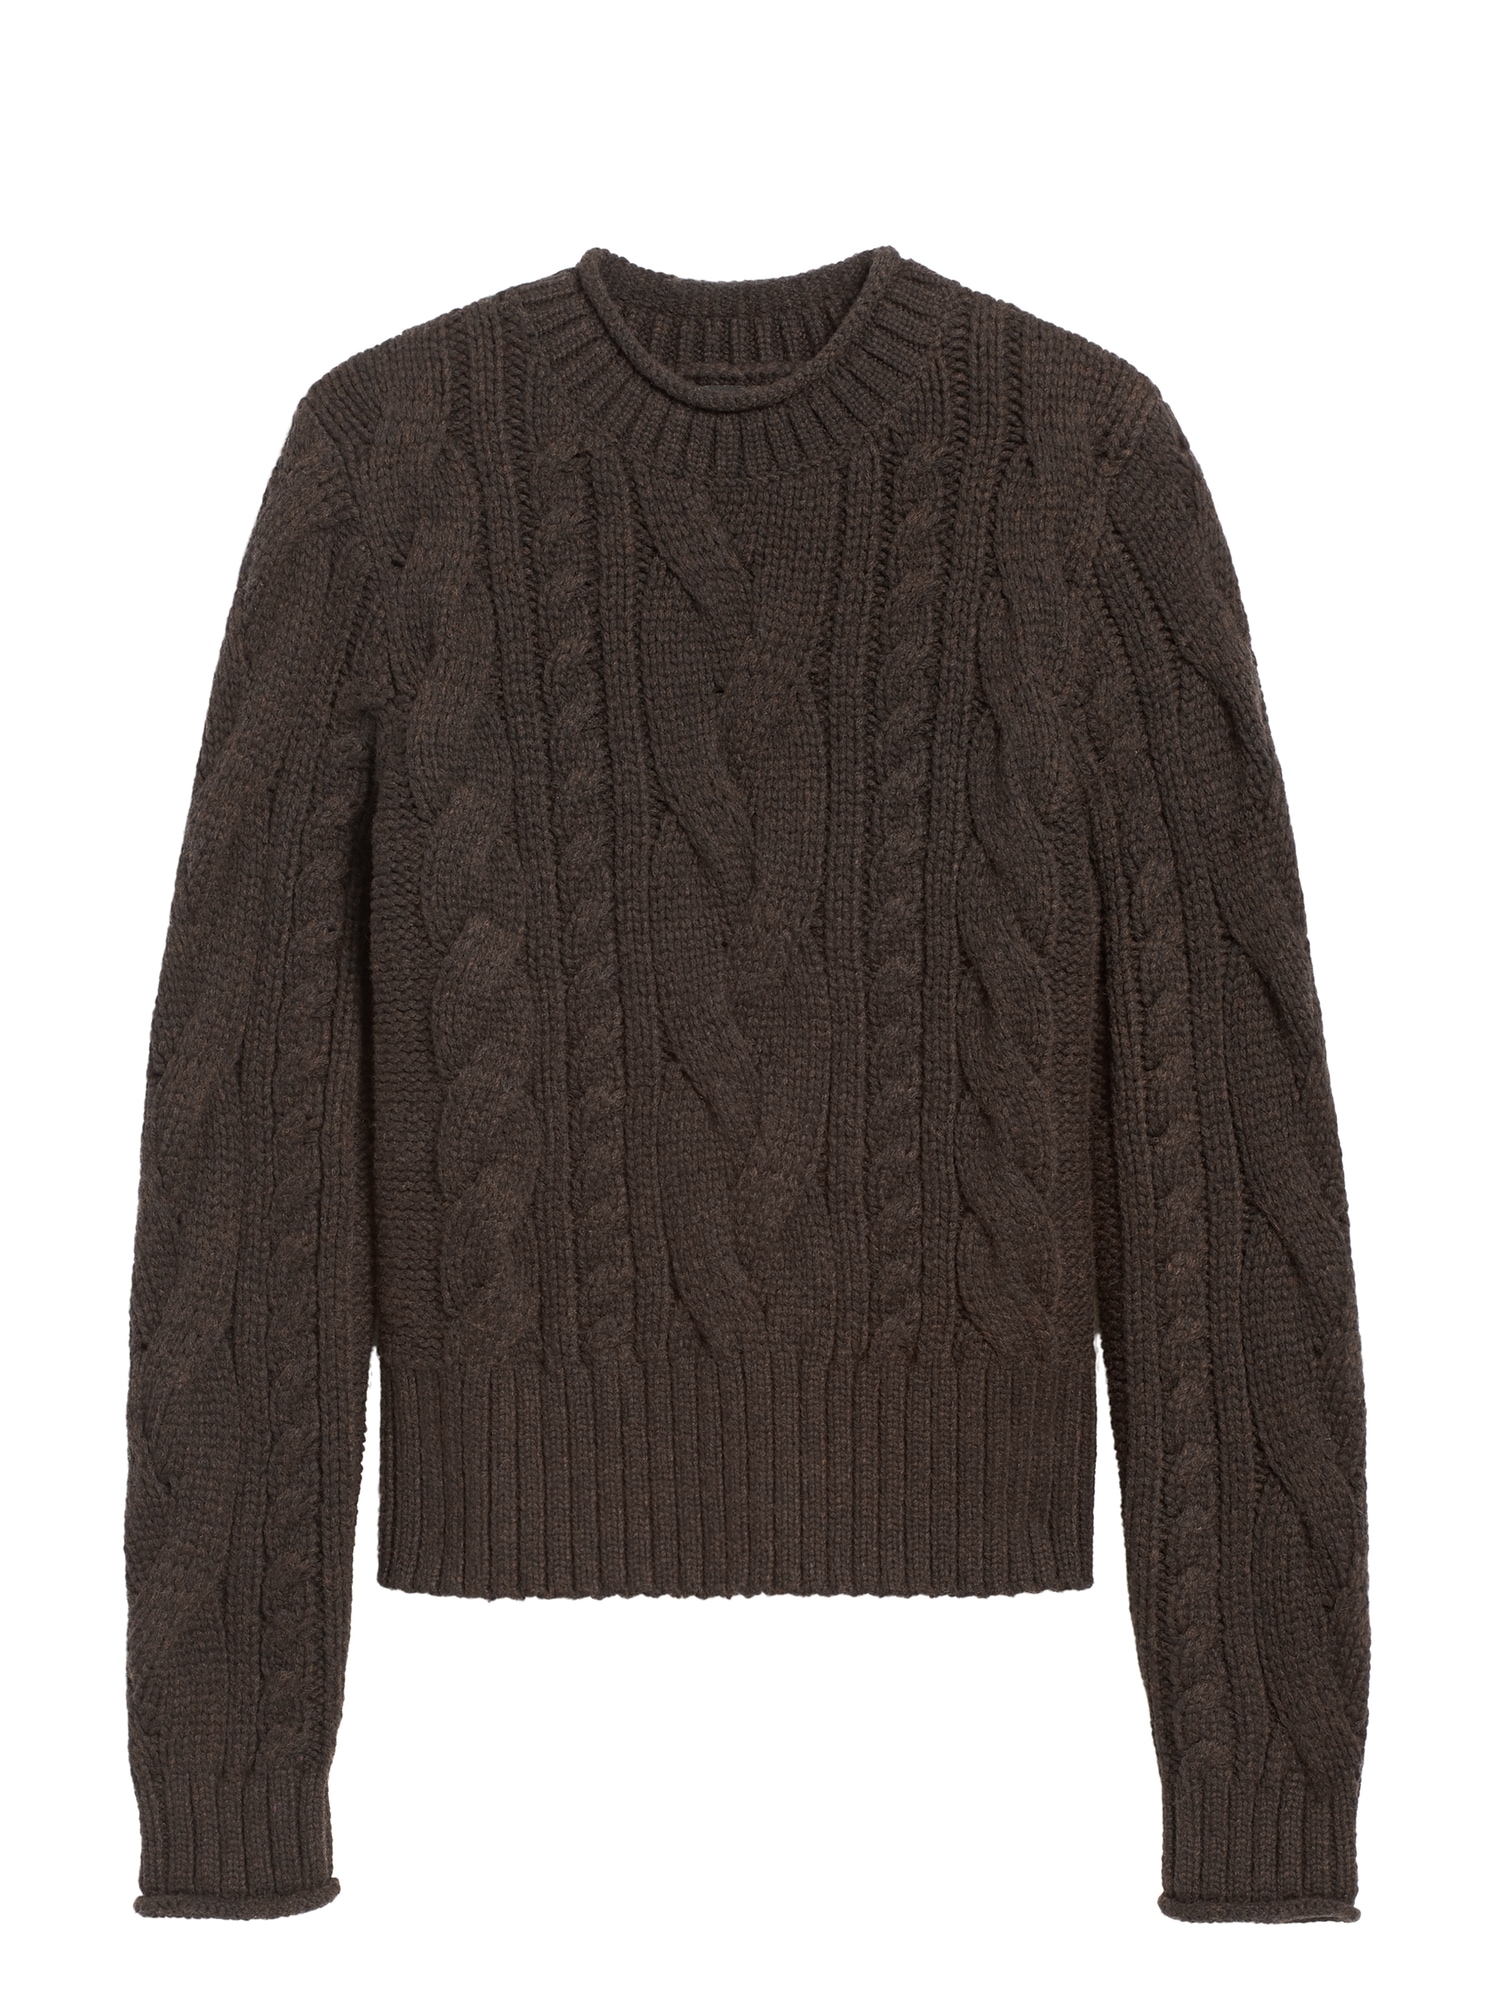 Free People Womens Cable Knit Cropped Sweater